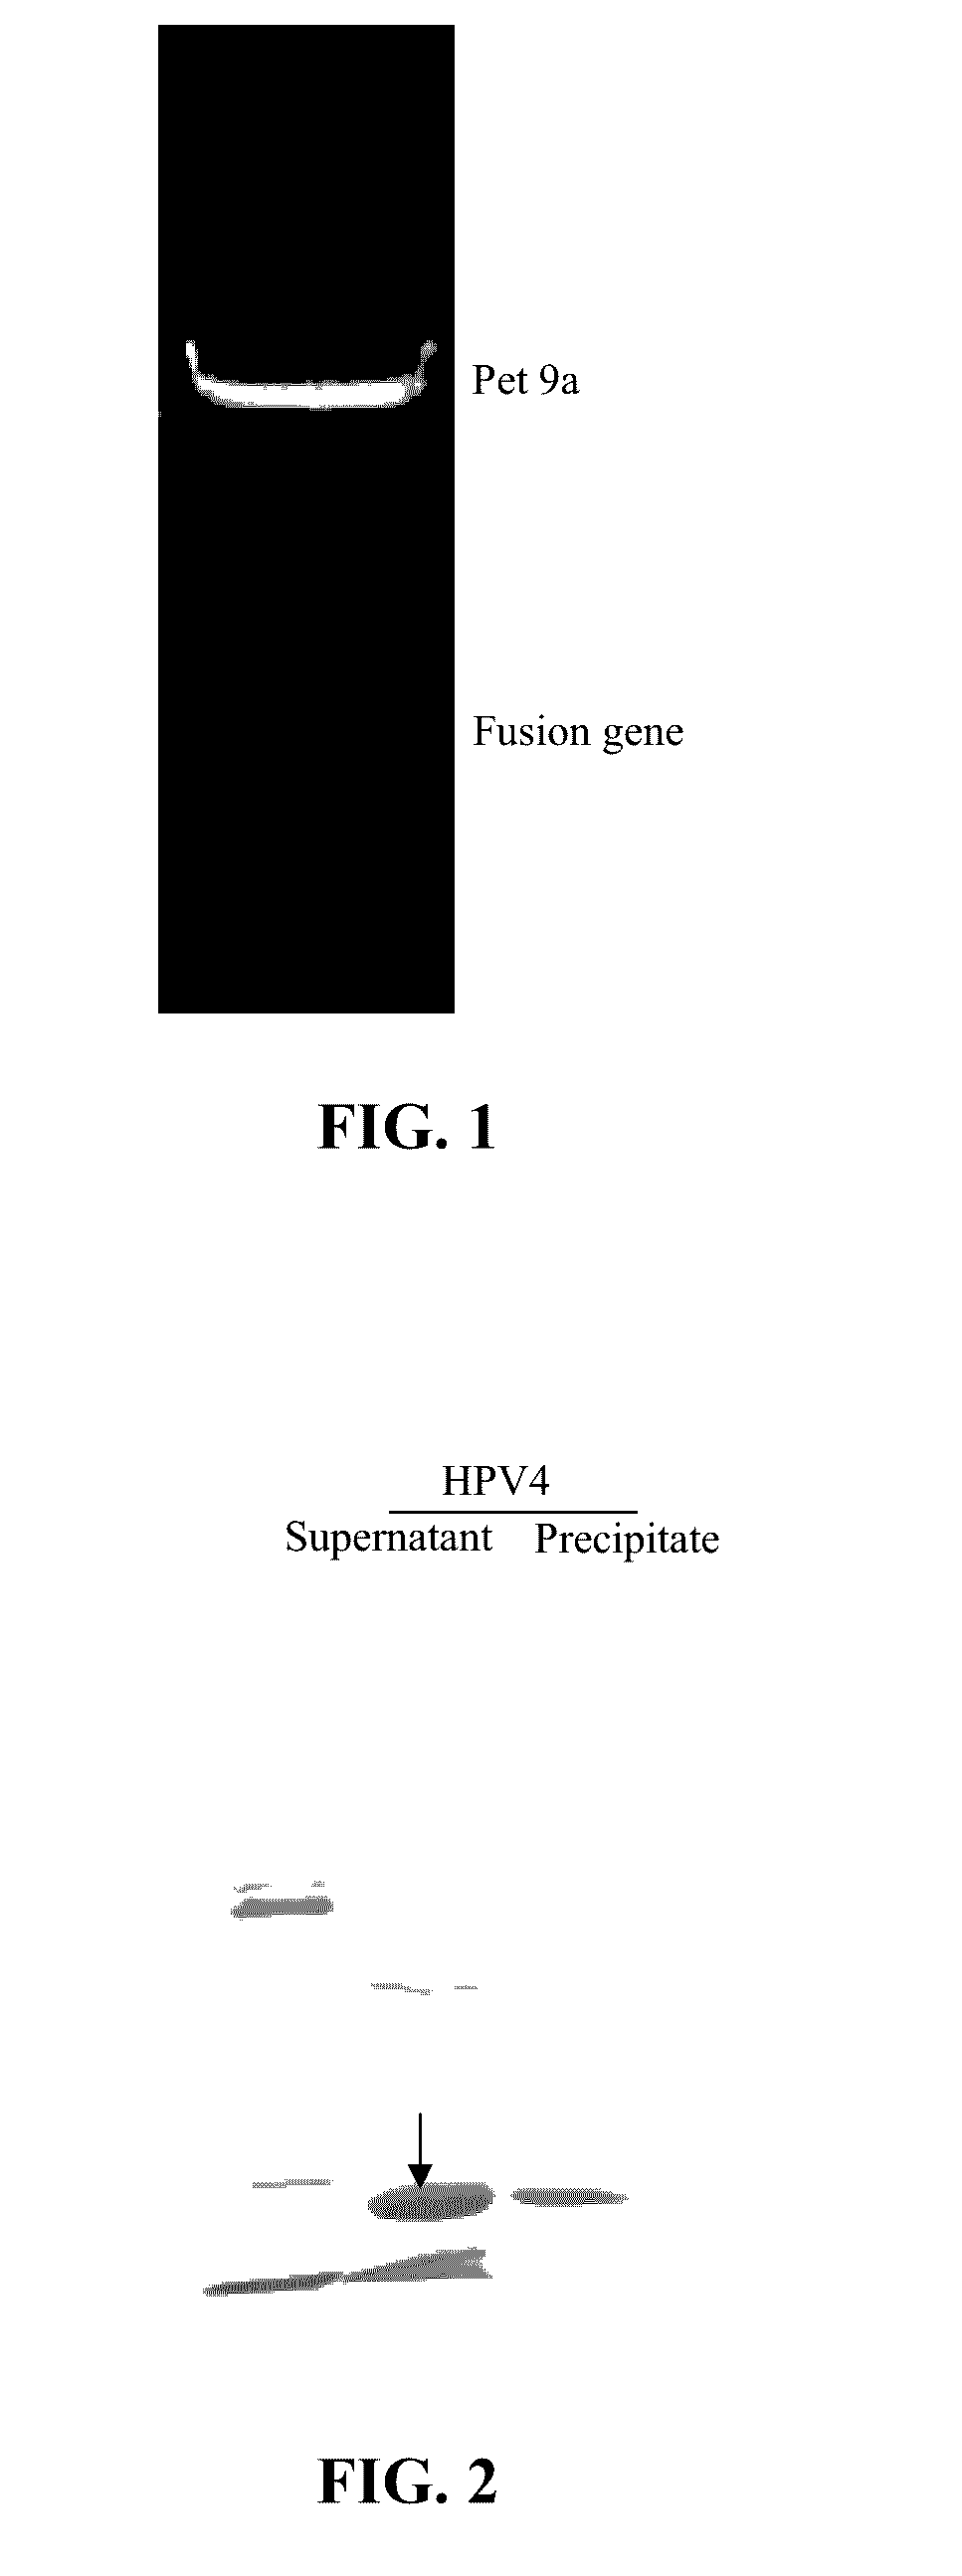 Method for enhancing immunogenicity of epitope peptide of HPV antigen, virus-like particle, and method for preparing HPV vaccine